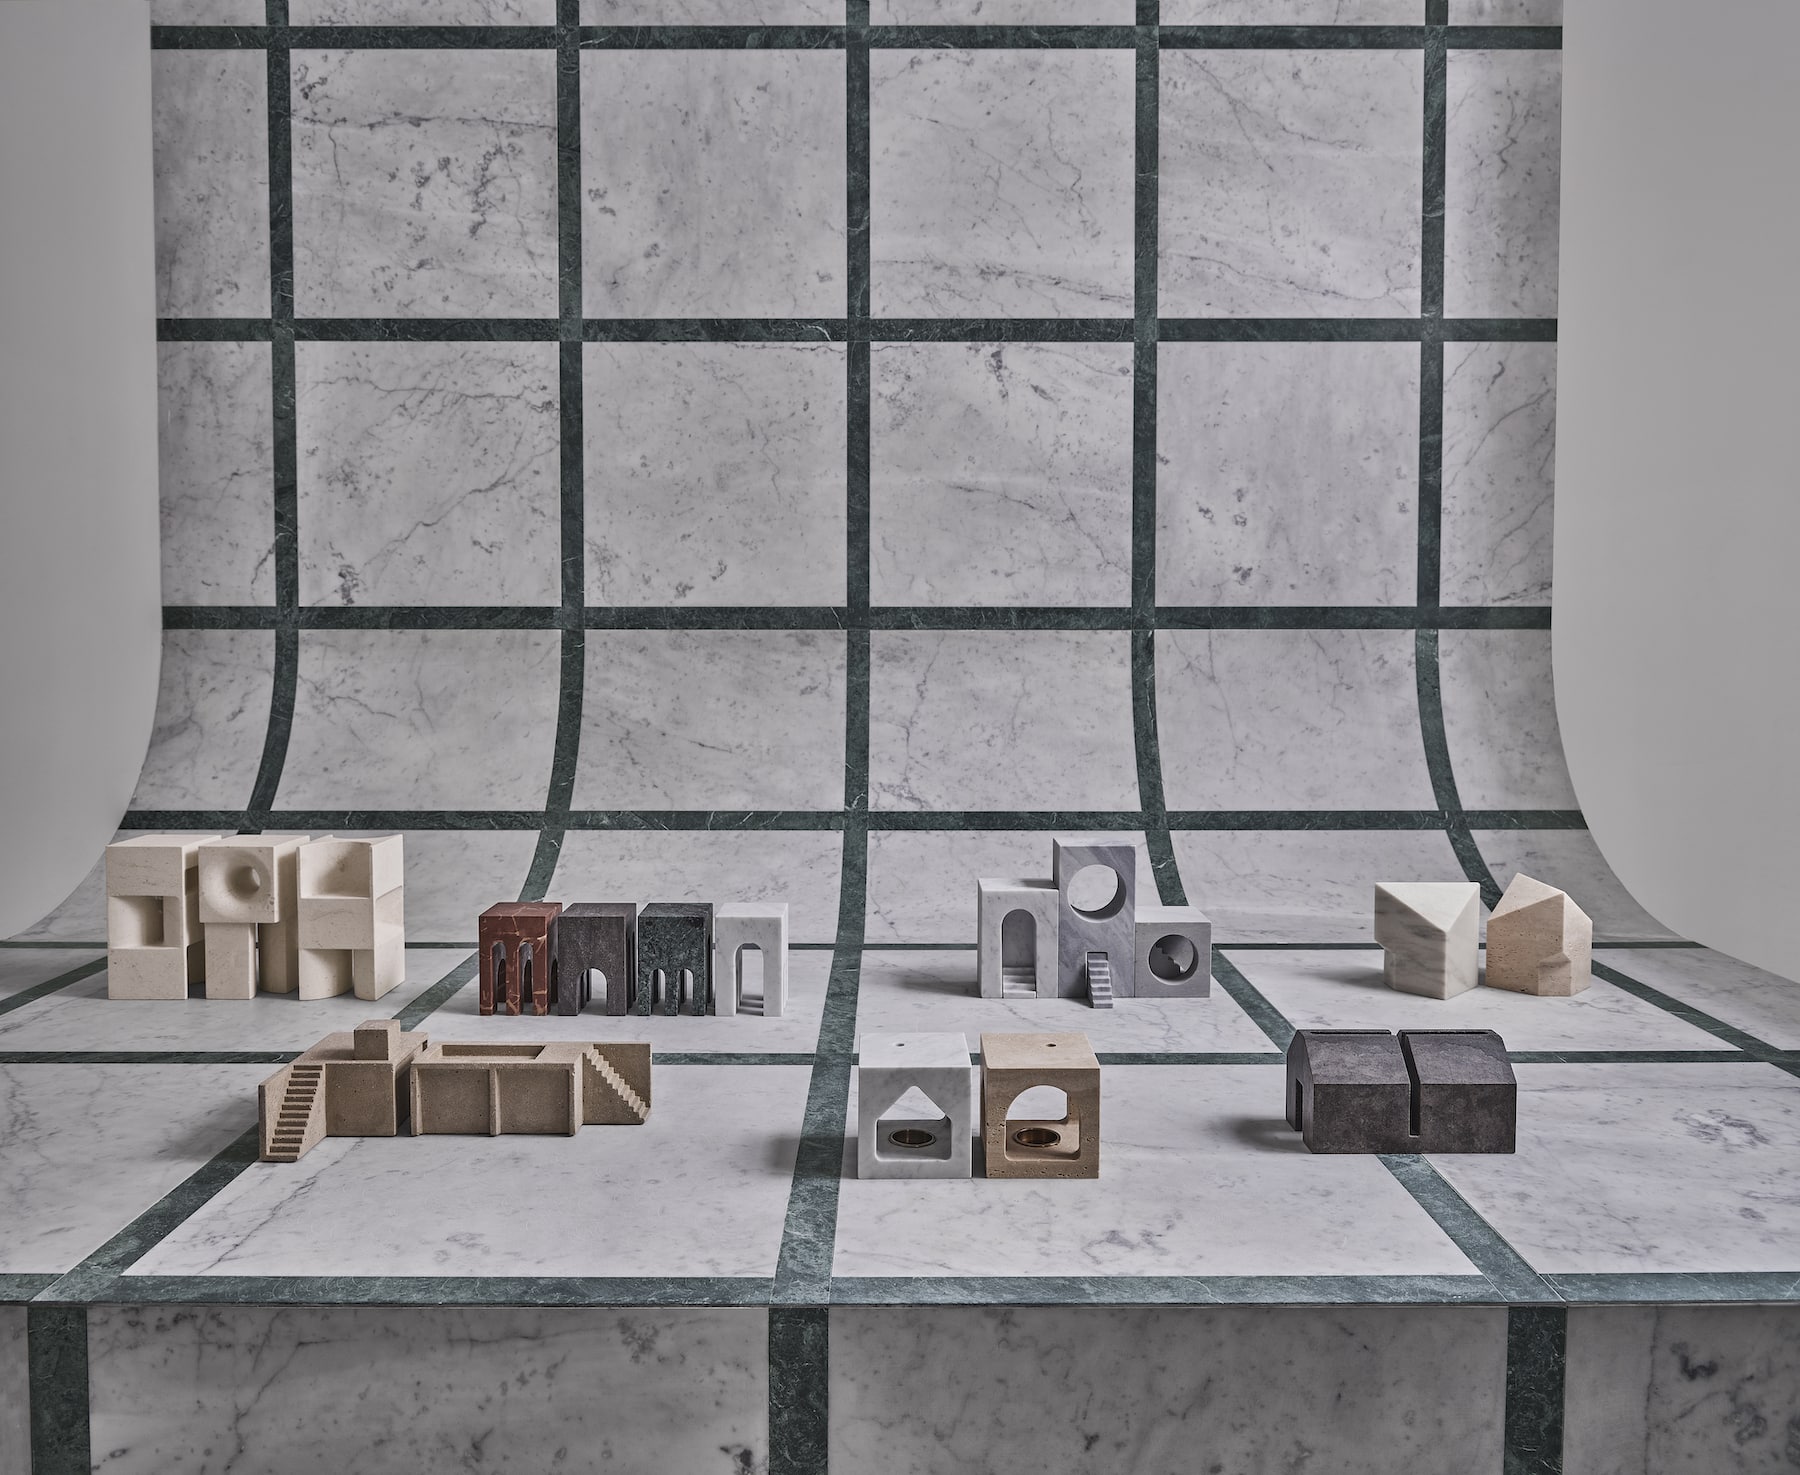 Salvatori Commissioned Several Famous Architects to Create Miniature Homes in Stone